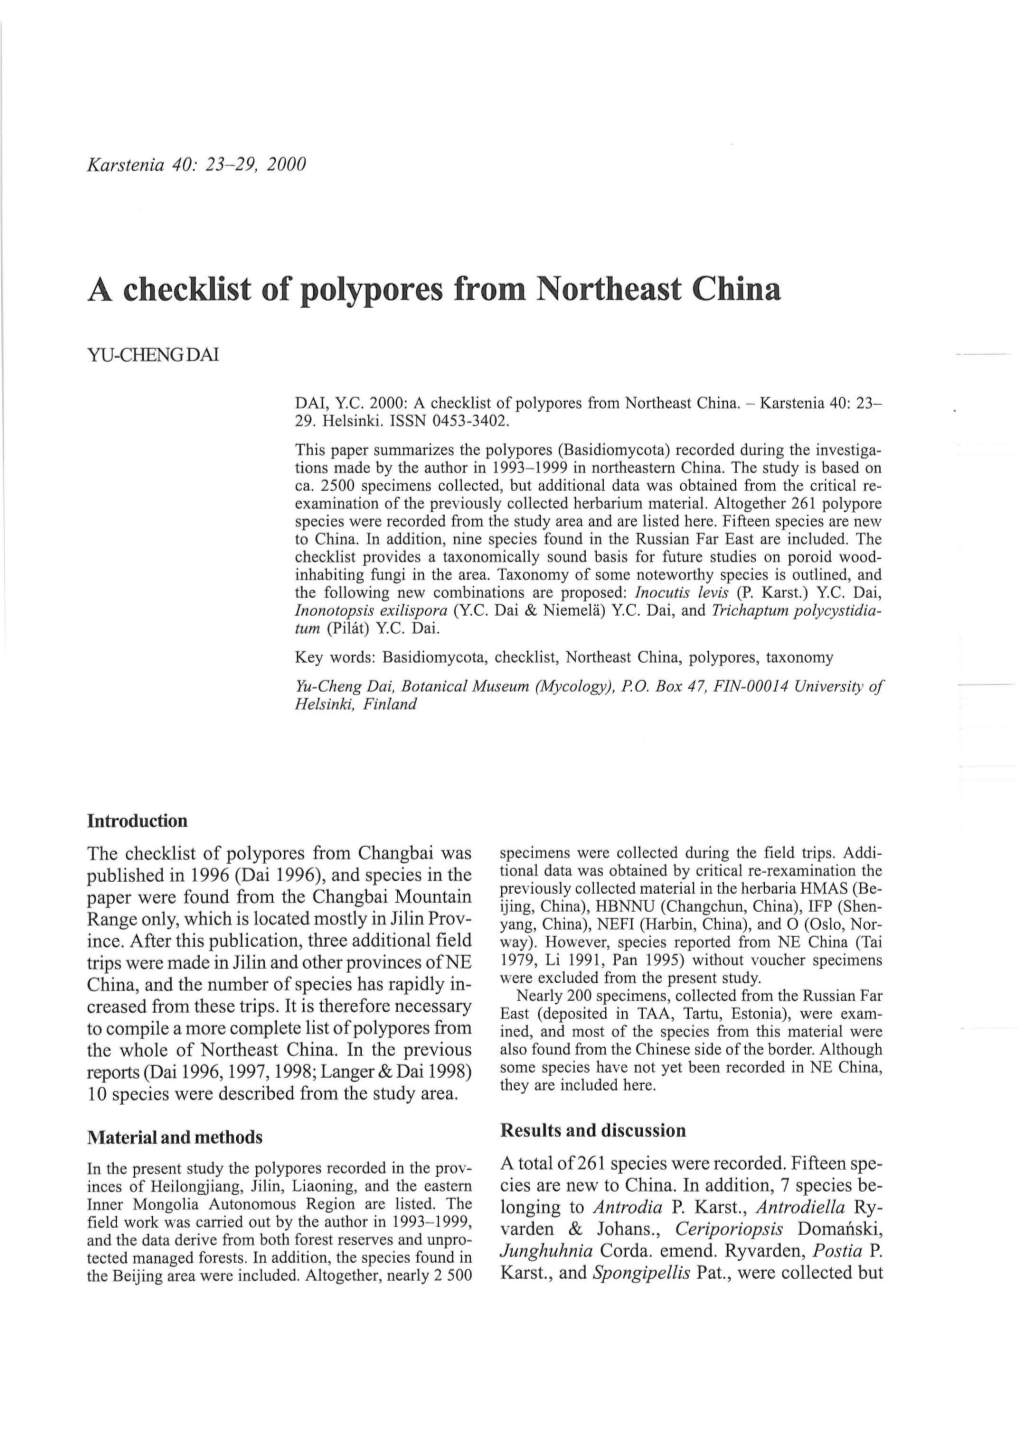 A Checklist of Polypores from Northeast China